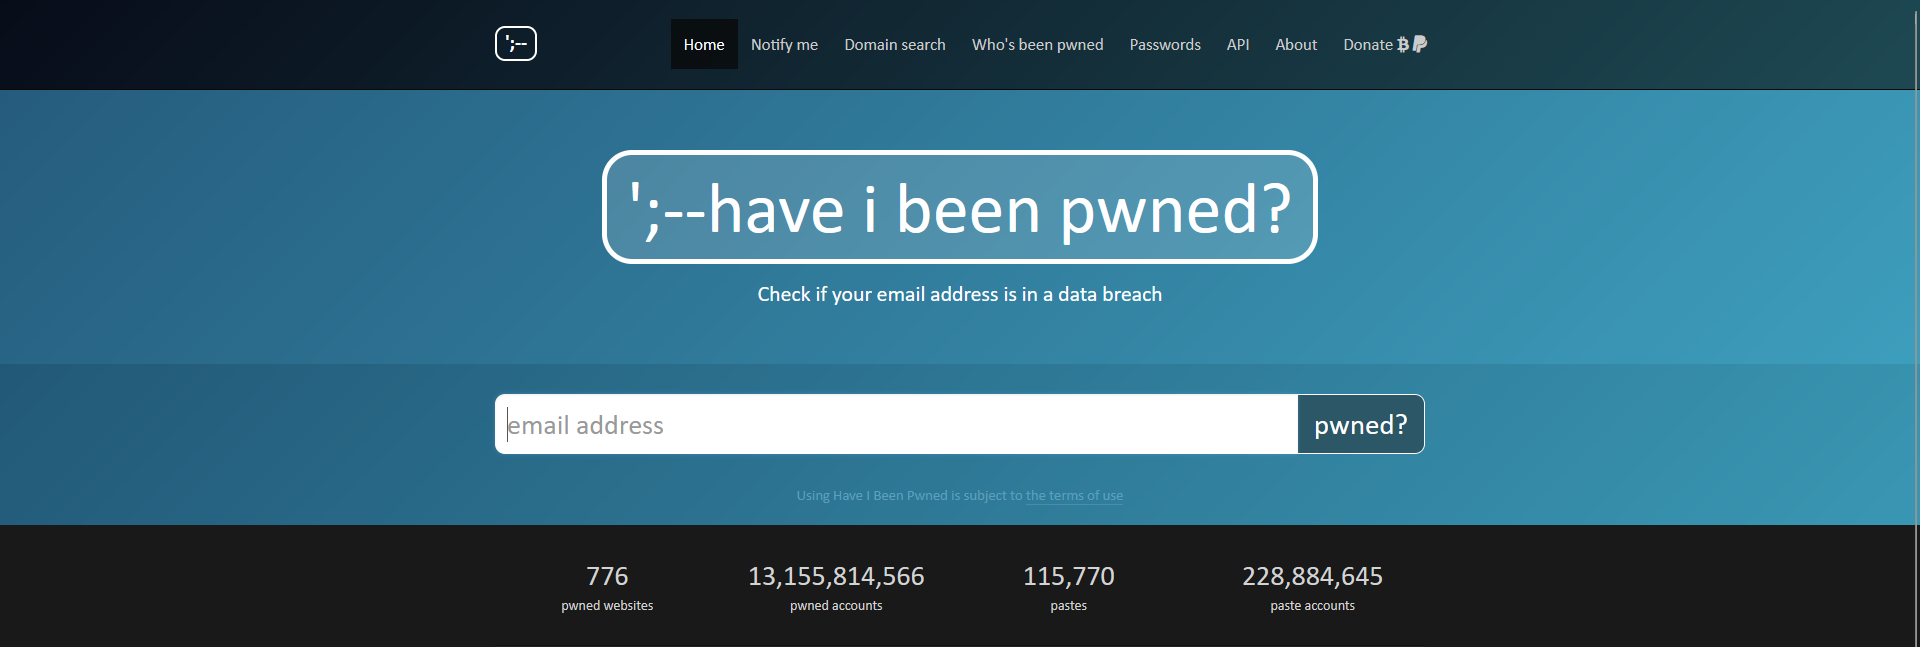 Have i been pwned front page